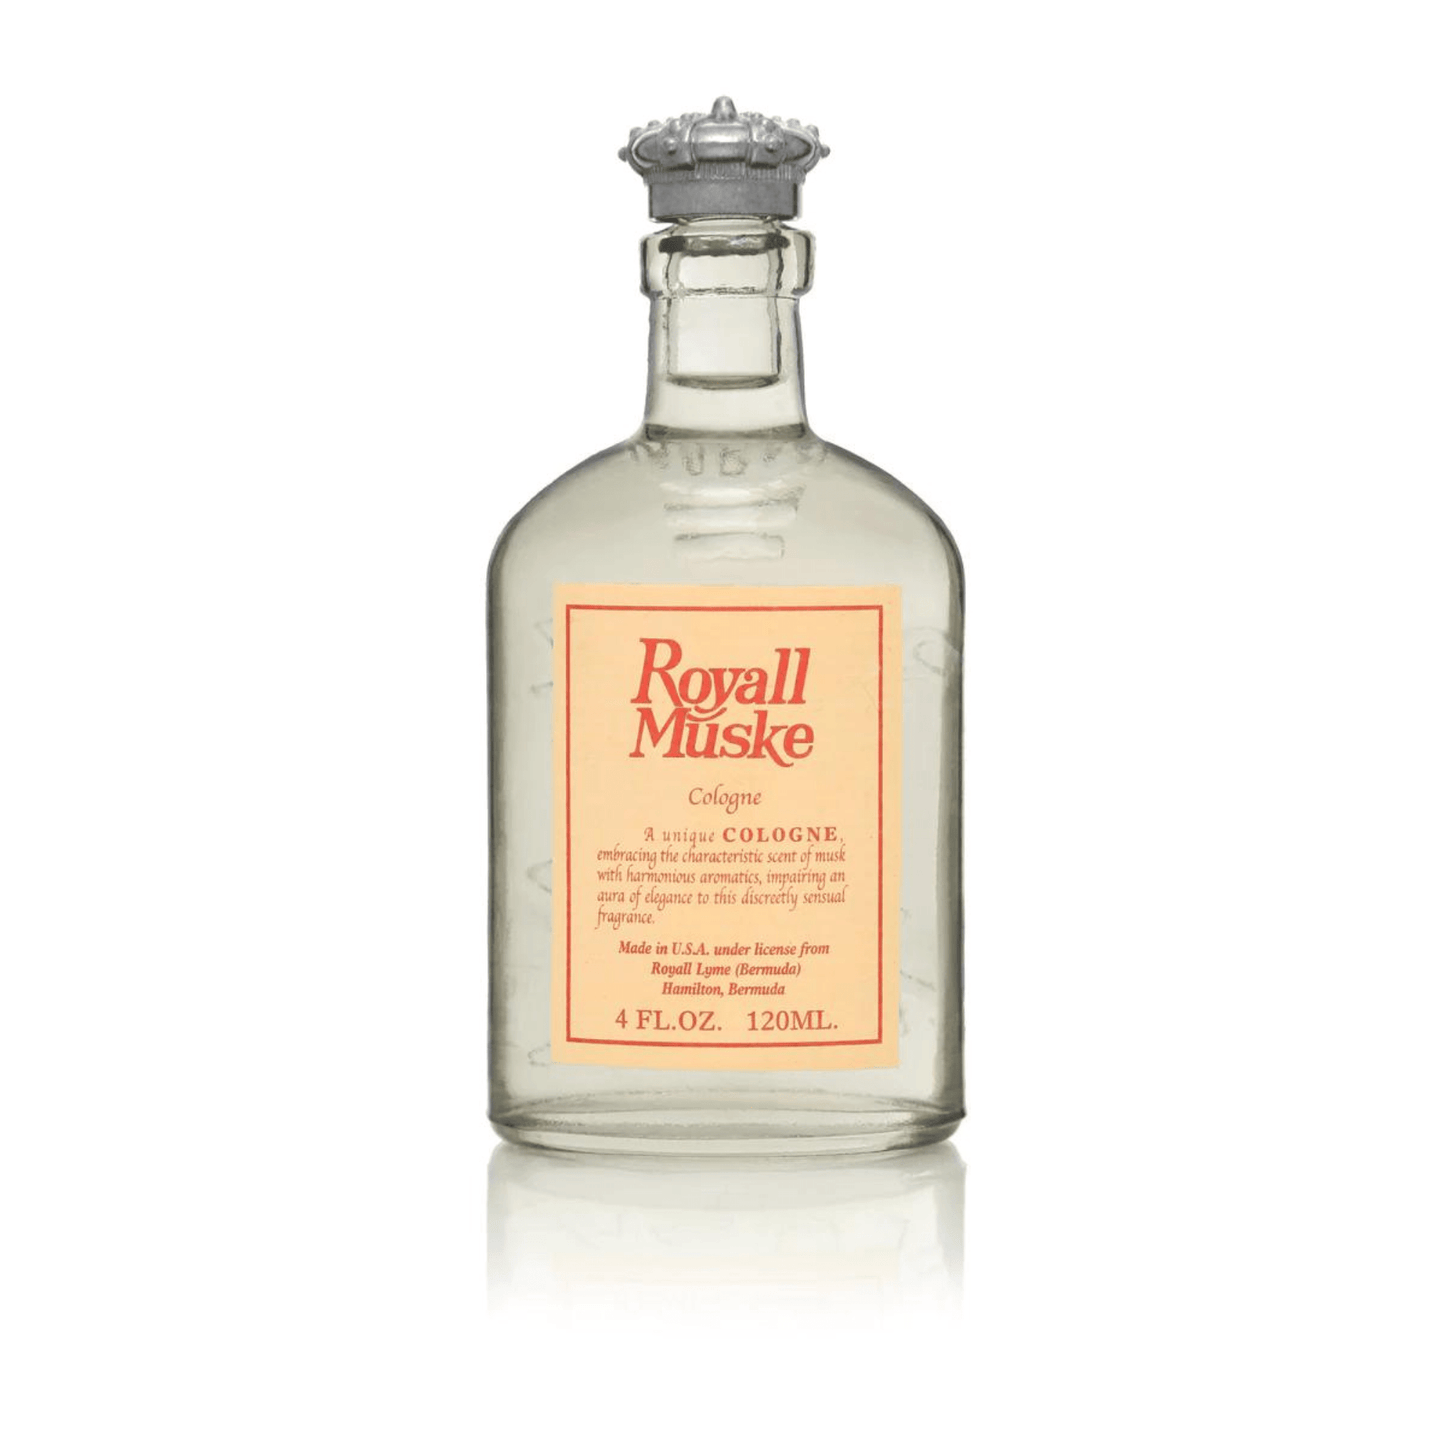 Primary Image of Royall Muske Cologne